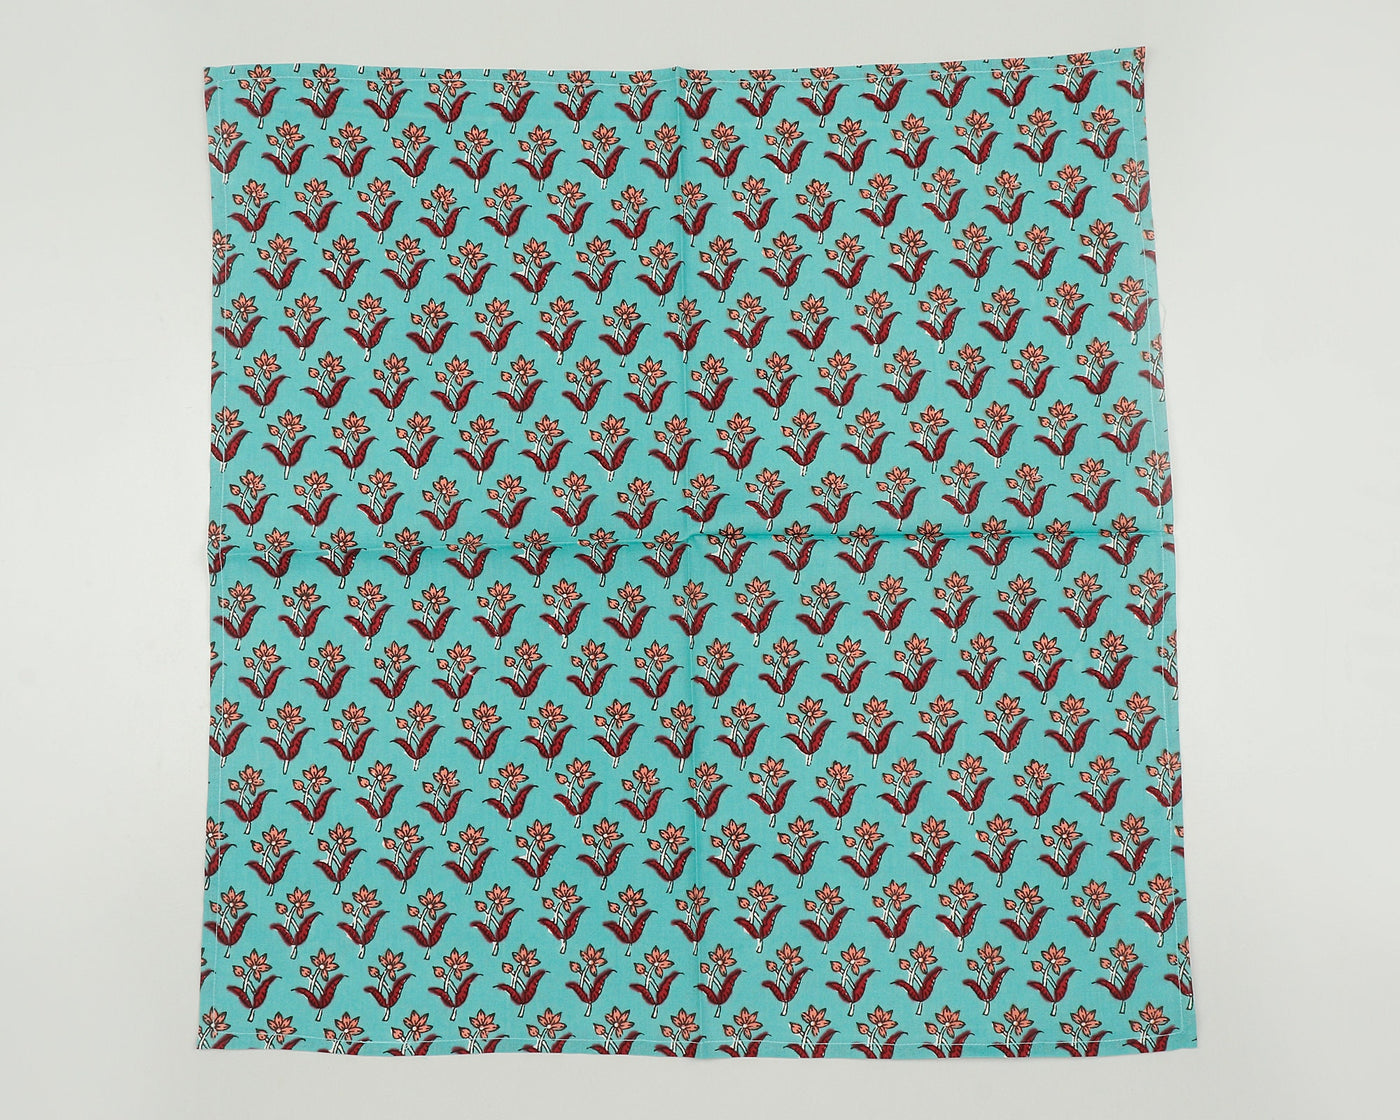 Teal Blue, Mahogany, Salmon Pink Indian Floral Printed Cotton Cloth Napkins, Valentines Gift, 18x18"- Cocktail Napkins, 20x20"- Dinner Napkins